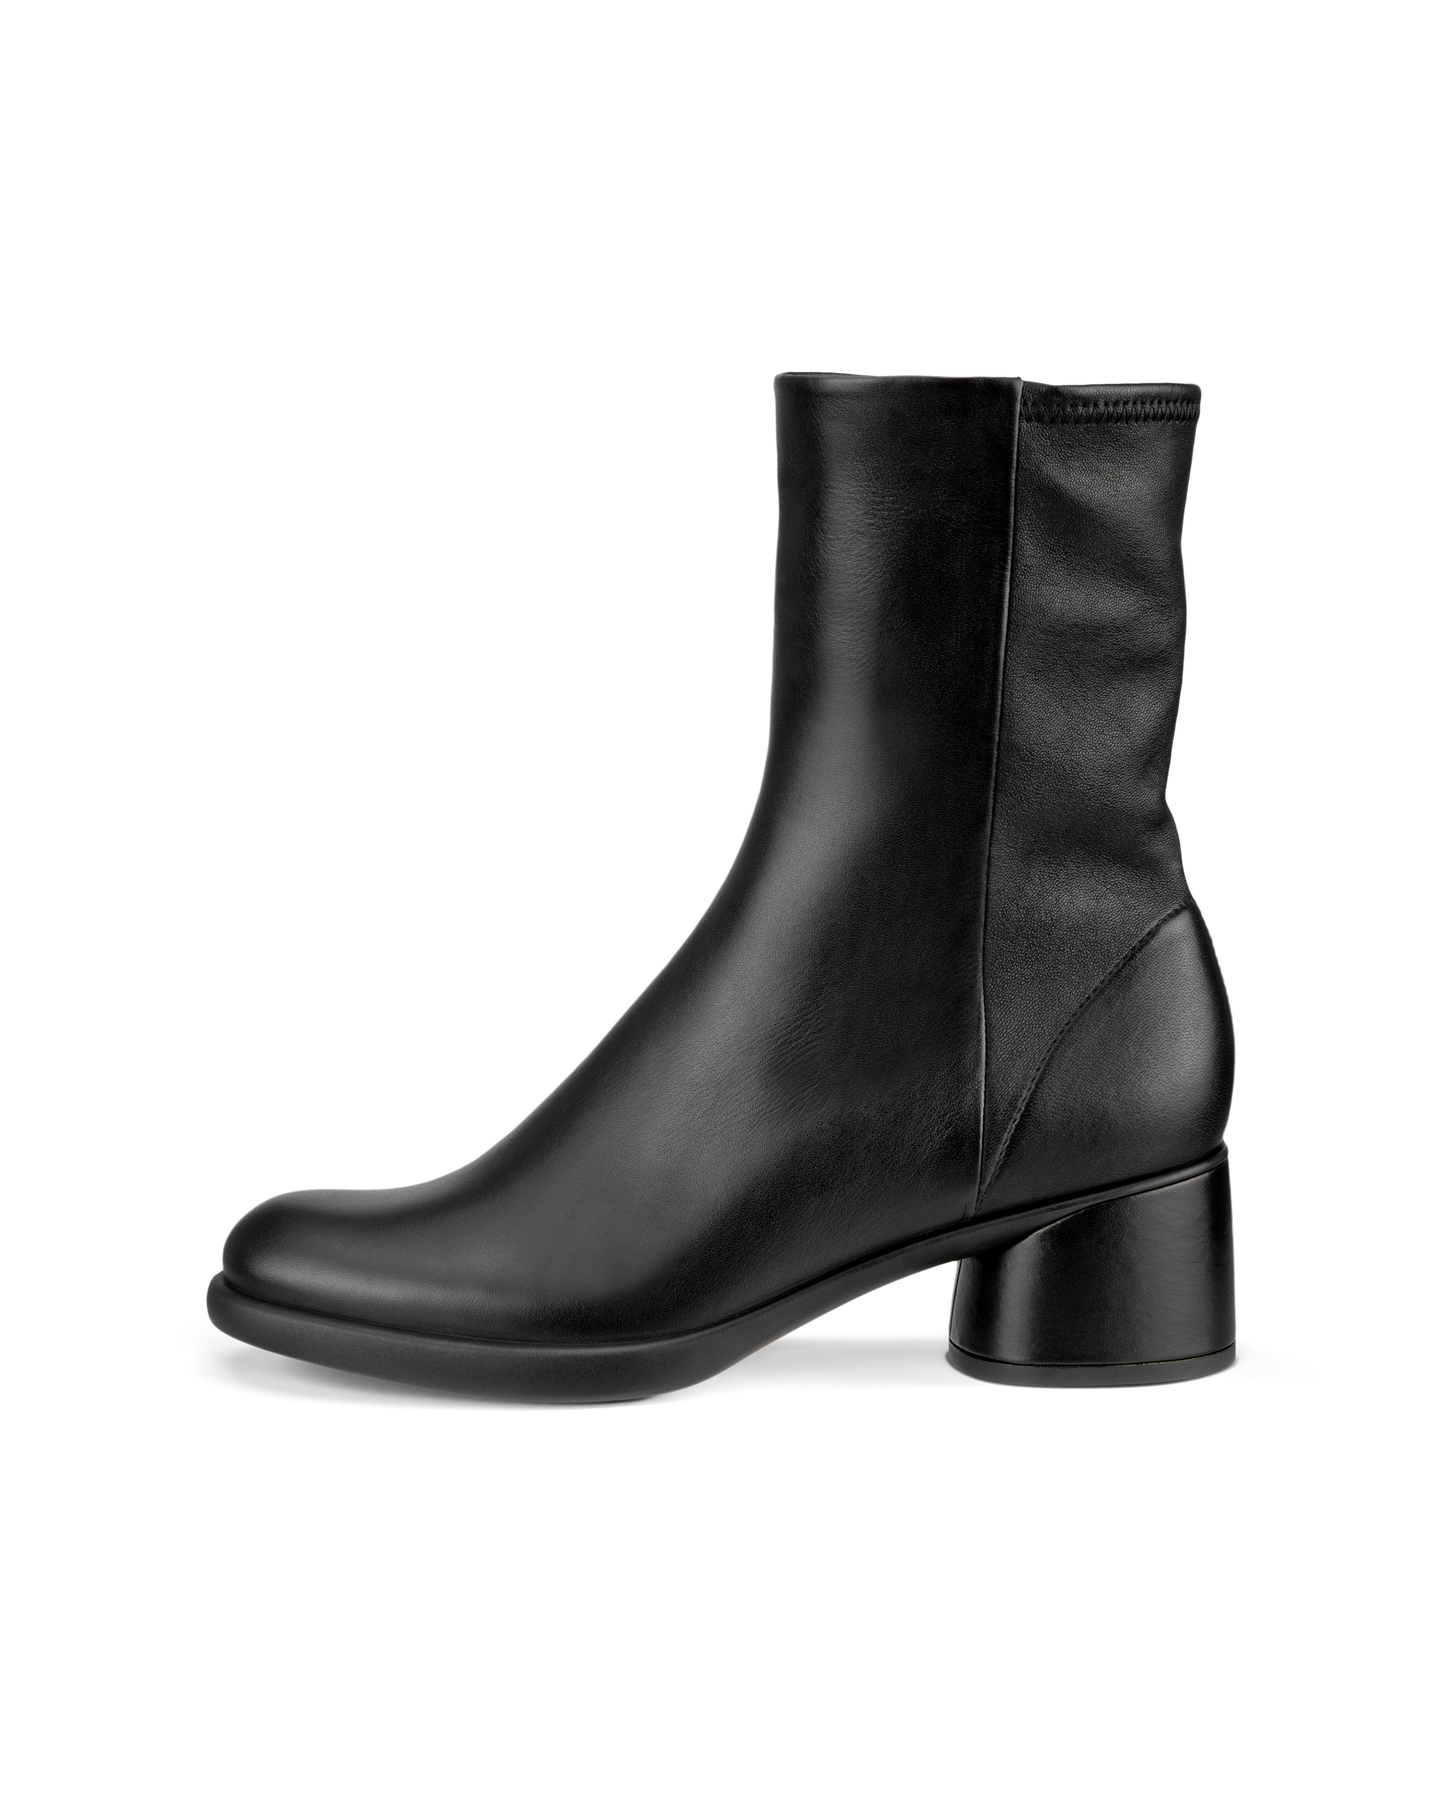 UPC 194891334747 product image for ECCO Women's Sculpted Lx 35 Mid-cut Boot Size 8 Leather Black | upcitemdb.com